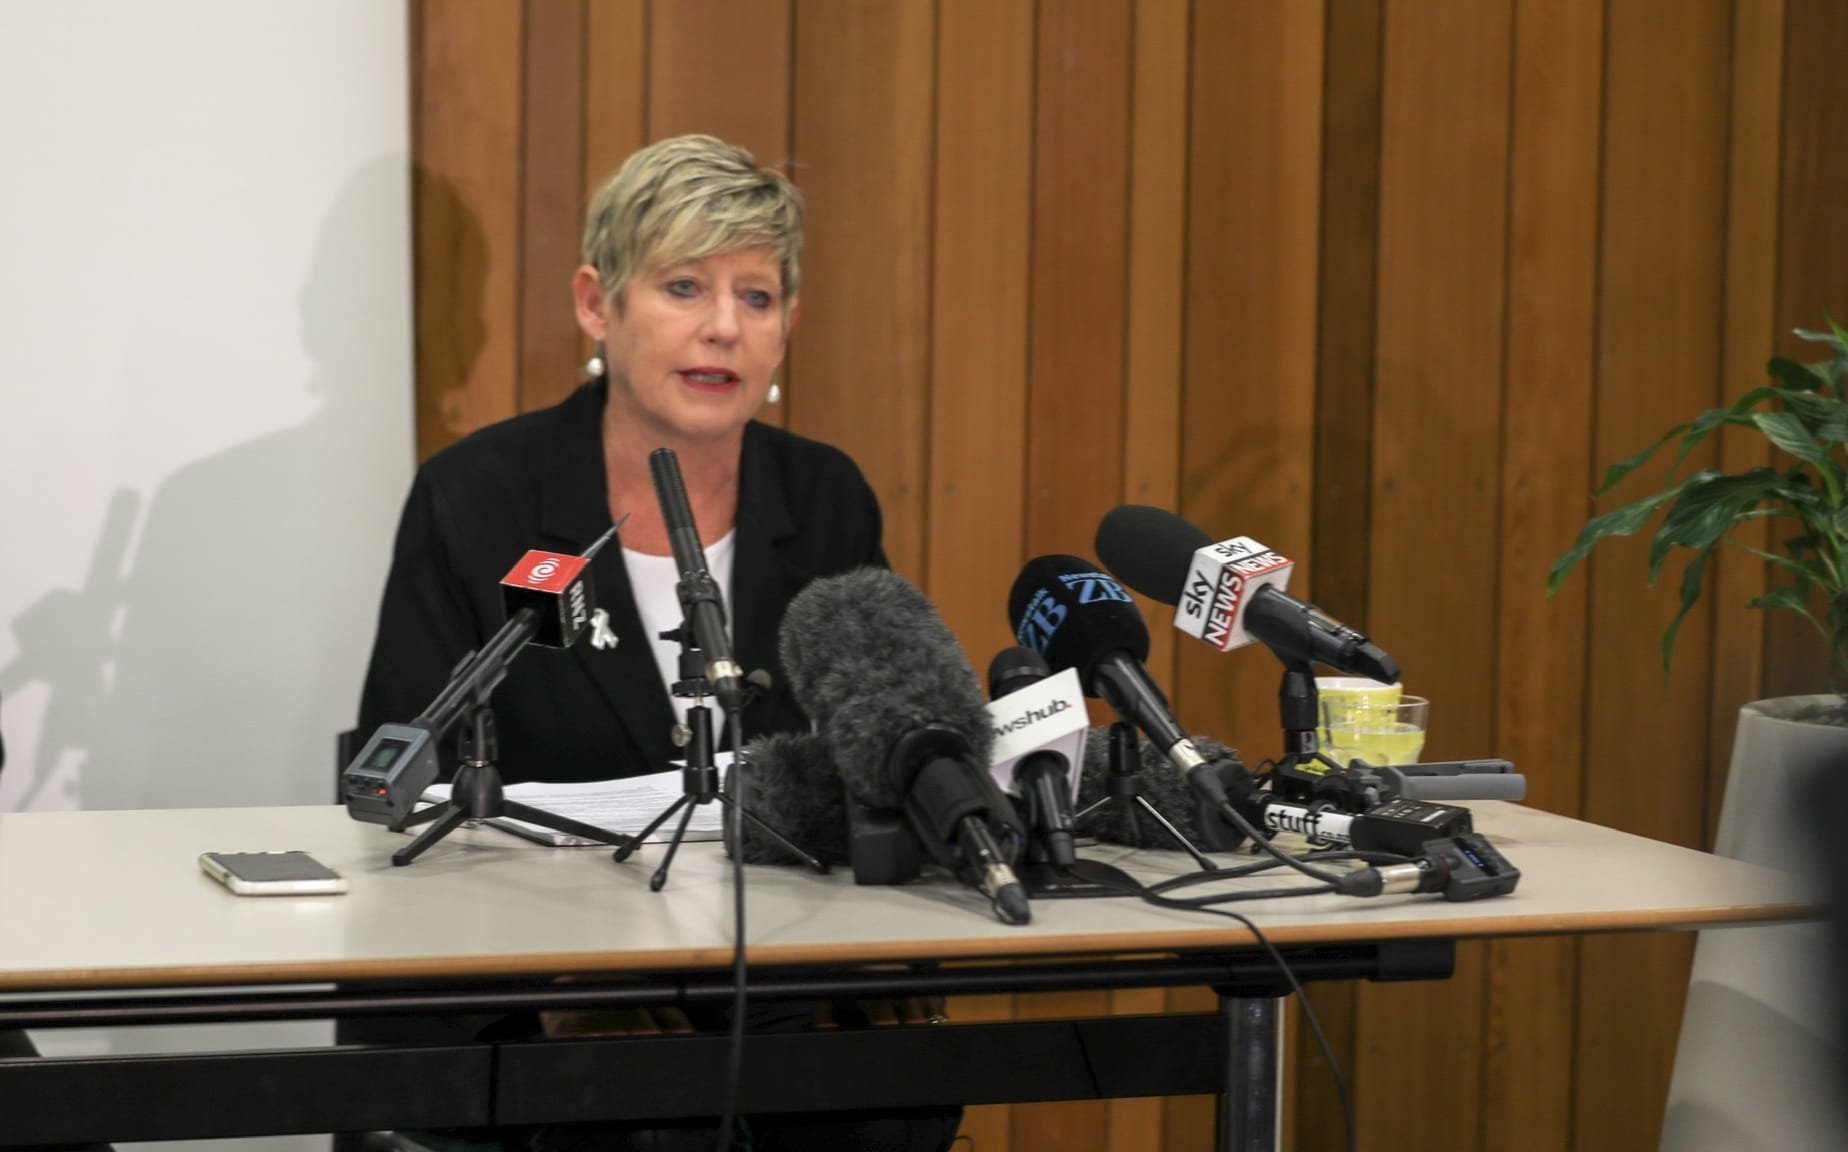 Christchurch mayor Lianne Dalziel speaks to reporters at the Christchurch City Council offices.